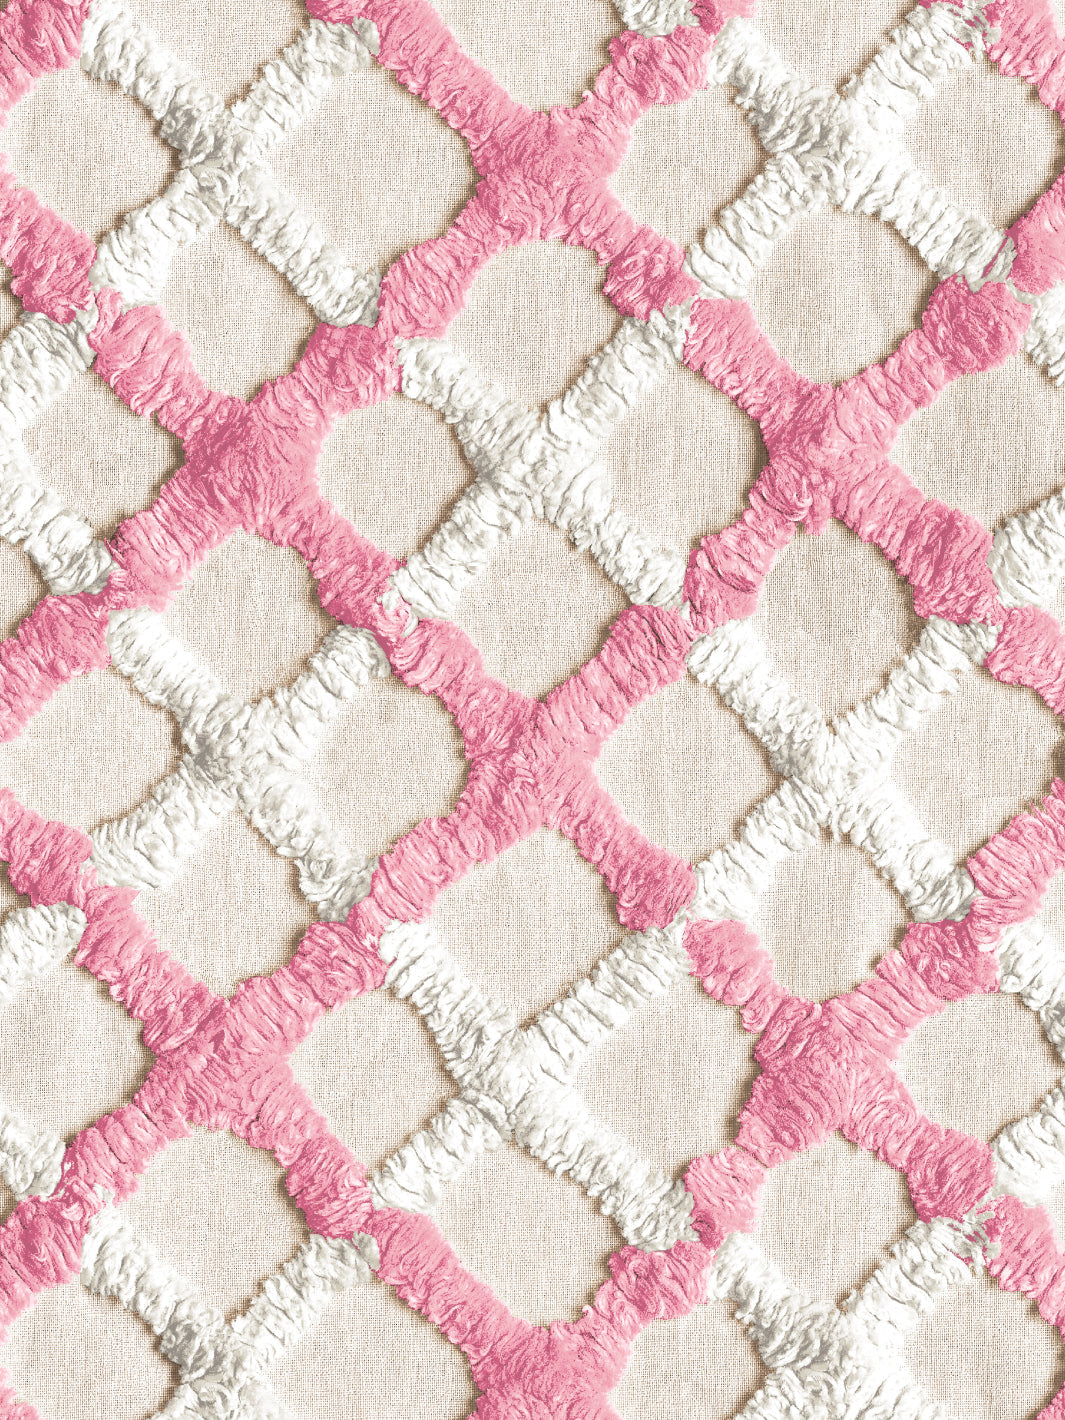 'Chenille Quilt' Wallpaper by Chris Benz - Pink